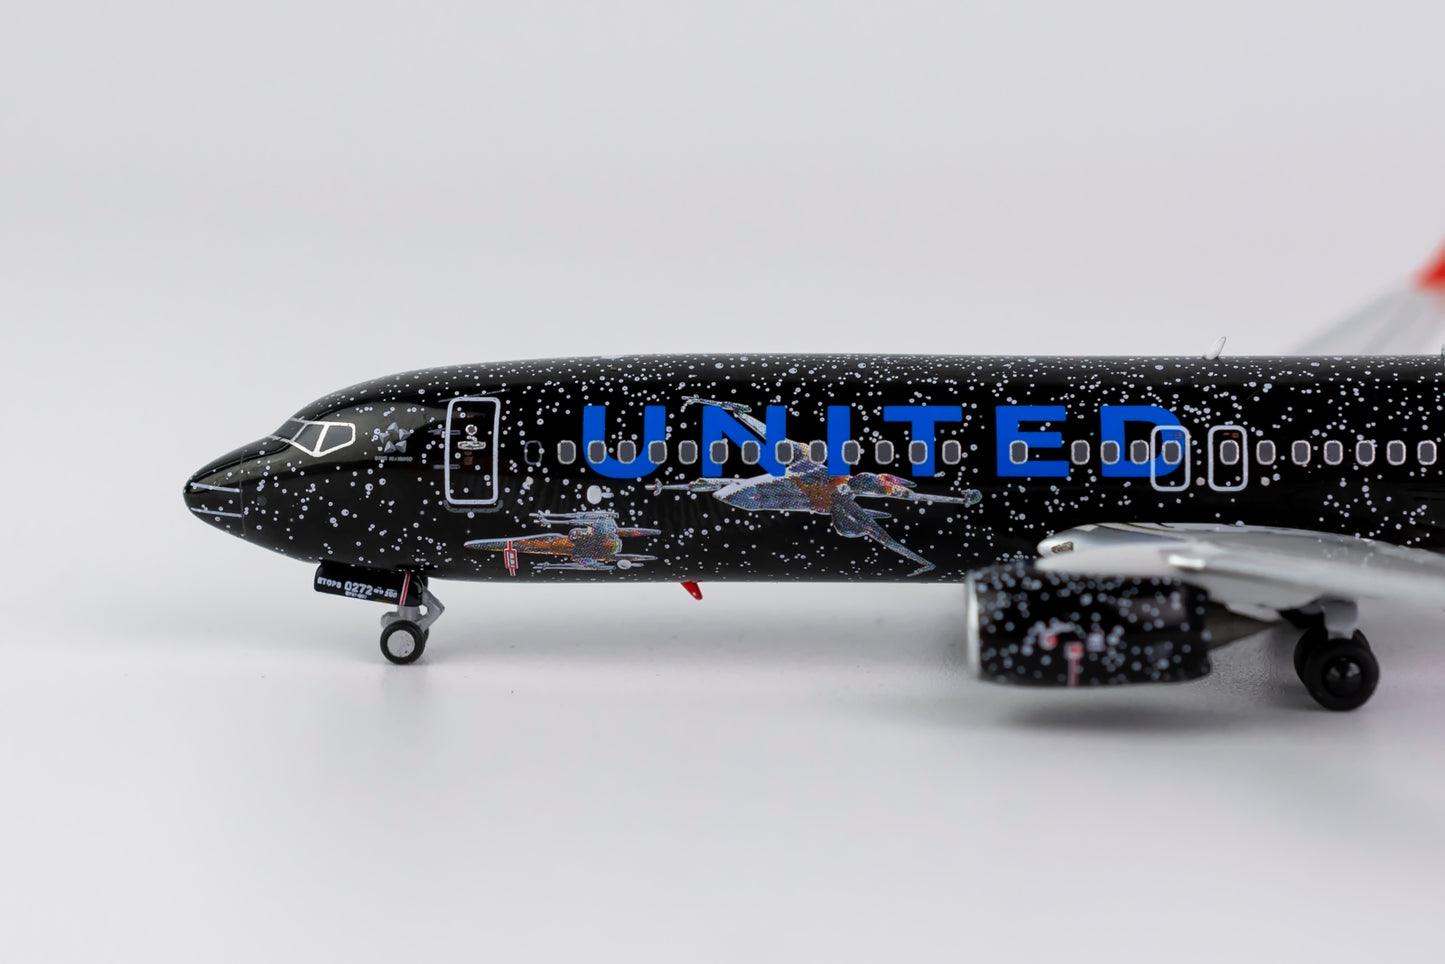 1:400 NG Models United Airlines Boeing 737-800/w "Special, with scimitar winglets" N36272 58133